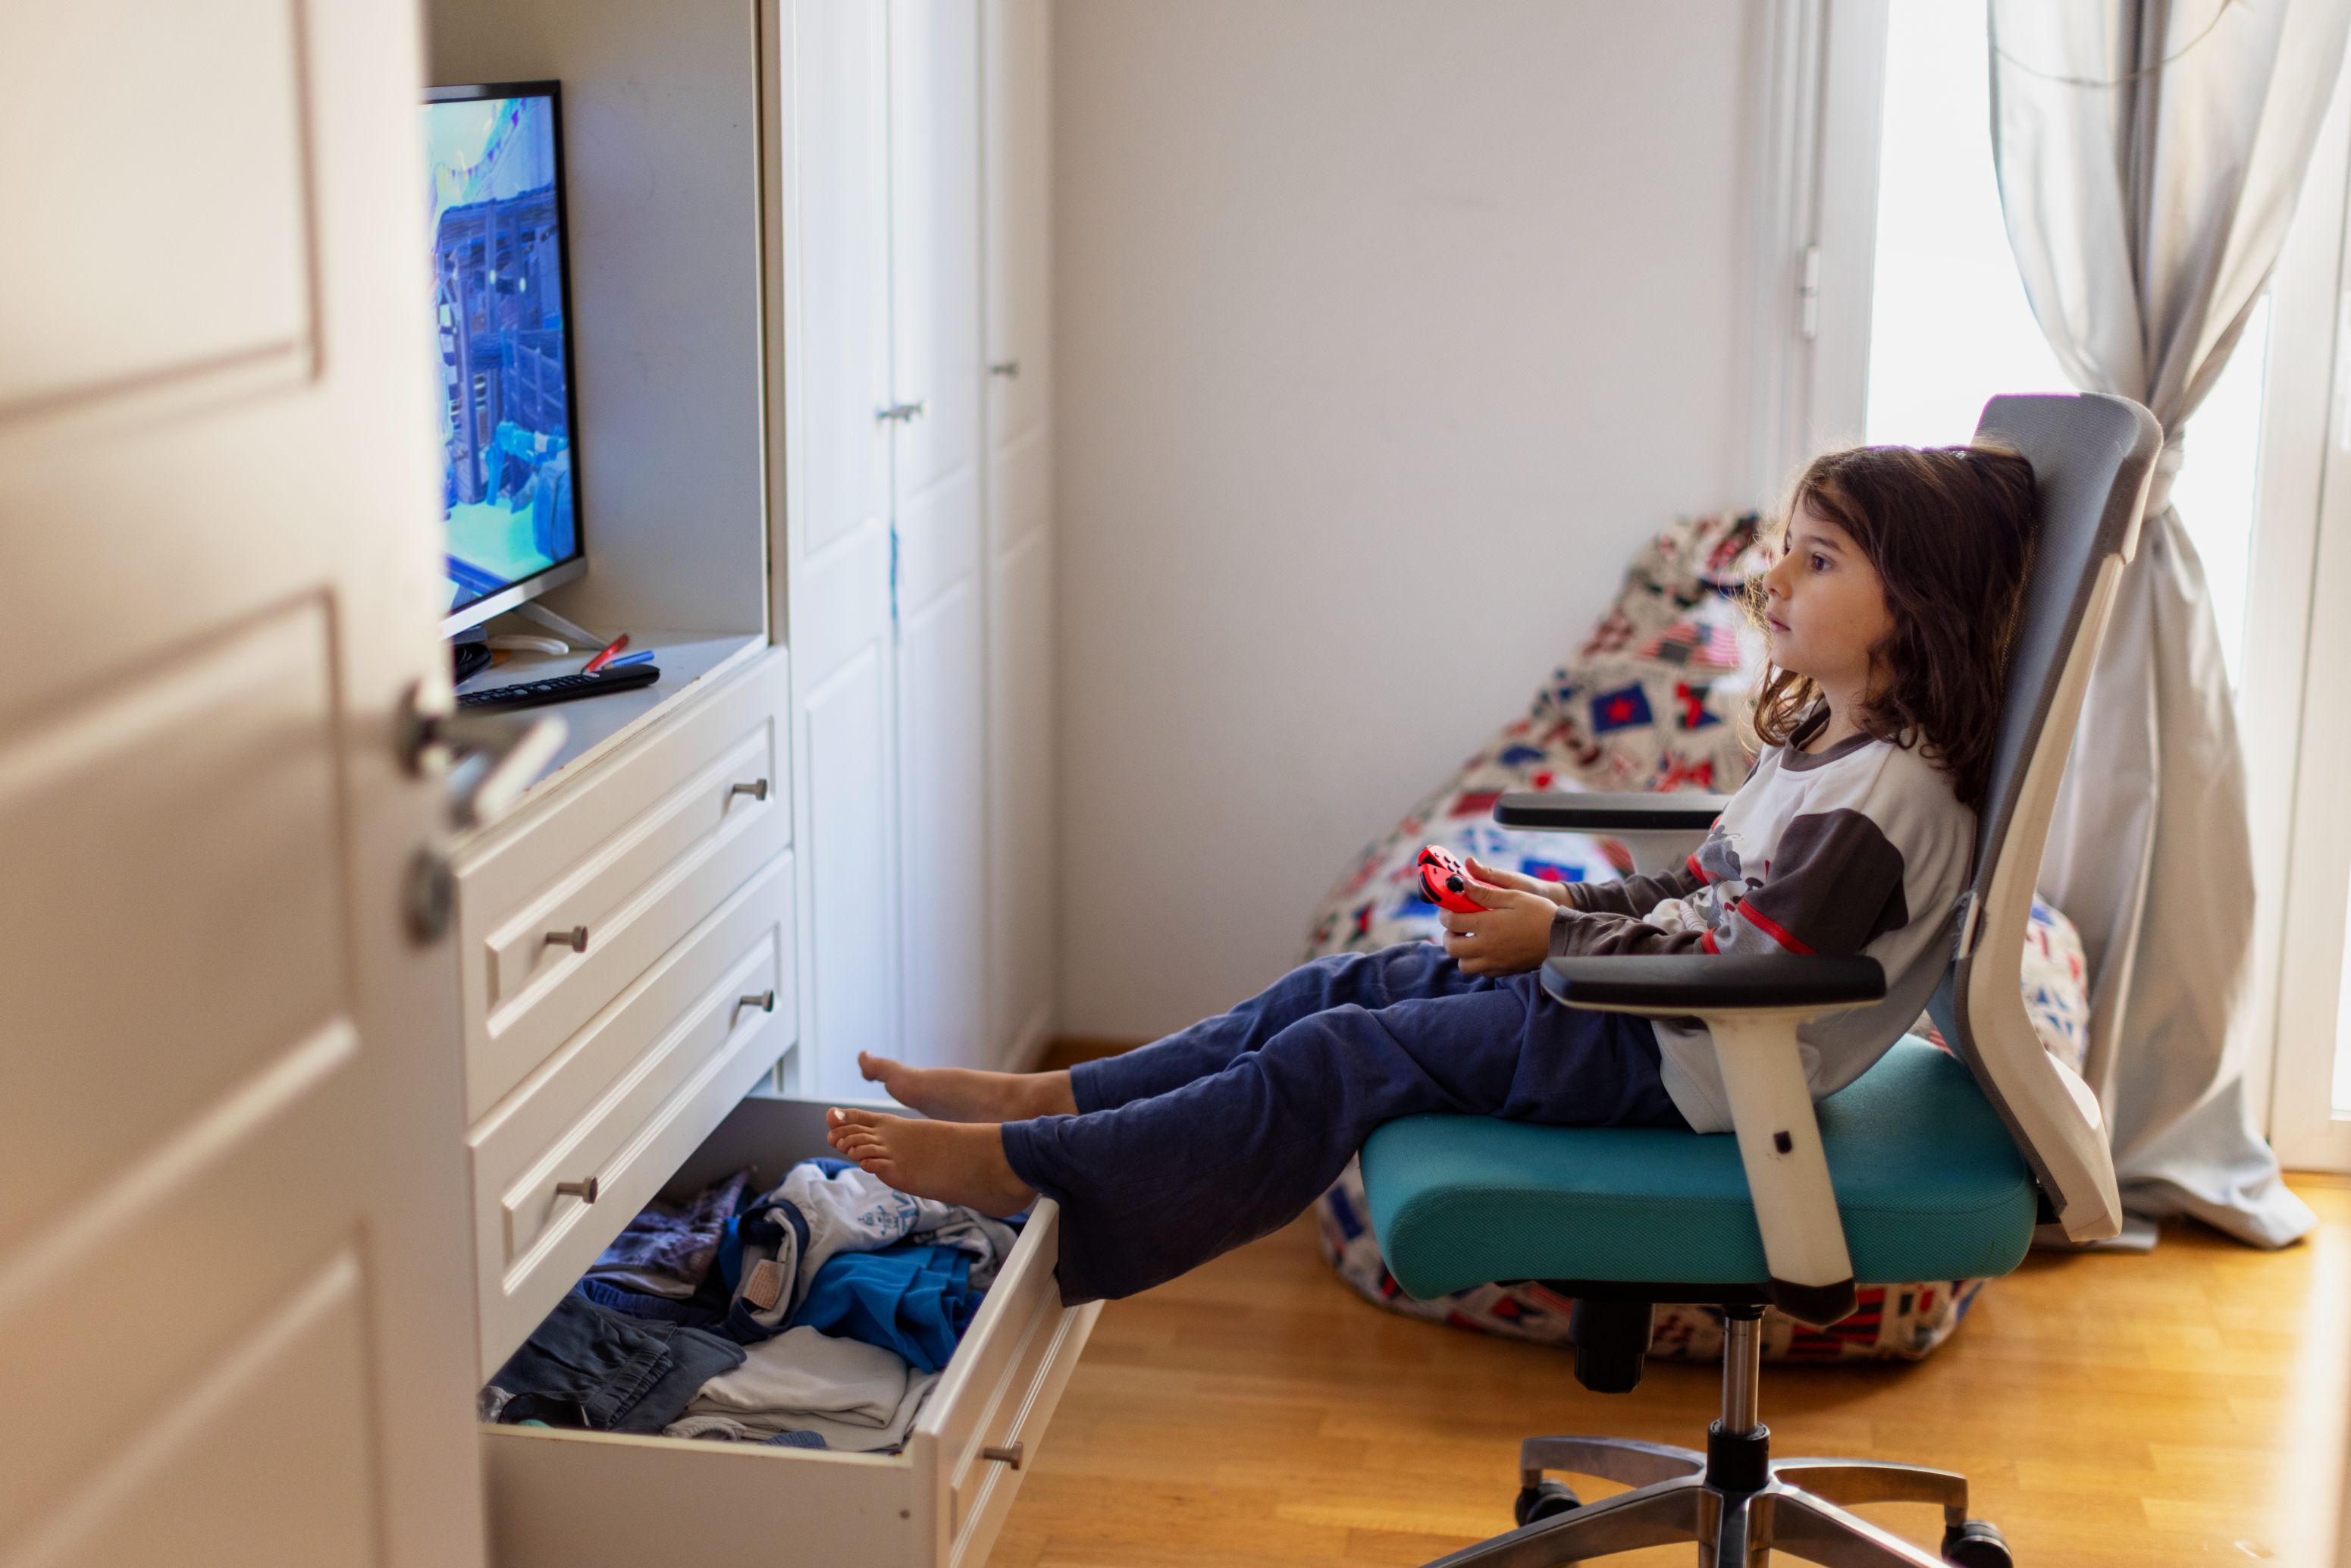 A little girl playing a video game